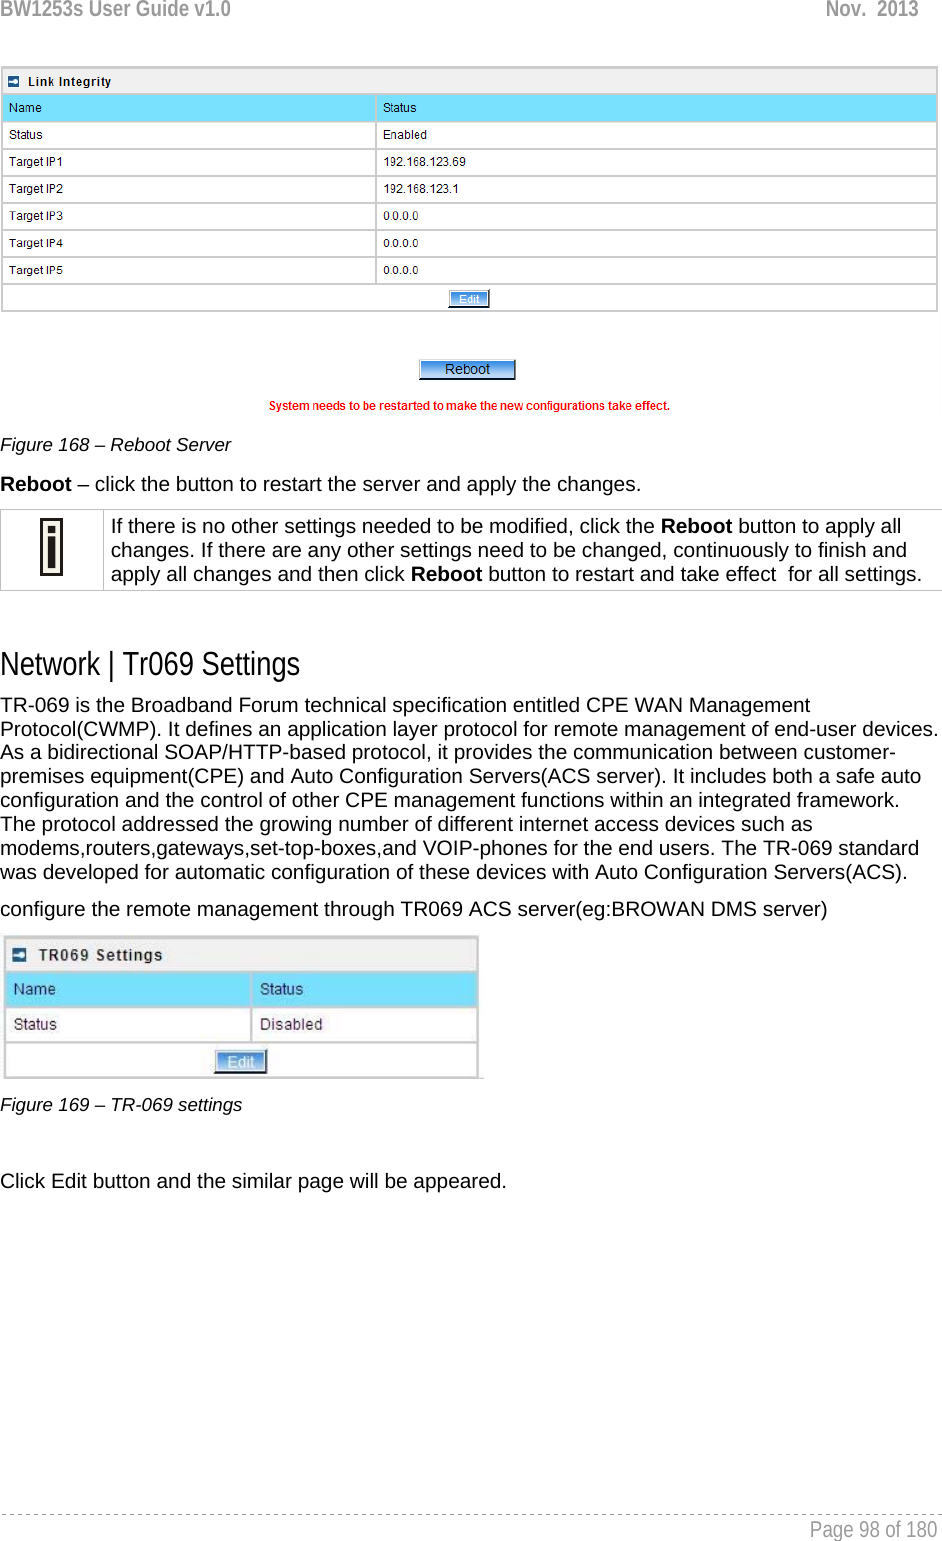 BW1253s User Guide v1.0  Nov.  2013     Page 98 of 180    Figure 168 – Reboot Server Reboot – click the button to restart the server and apply the changes.  If there is no other settings needed to be modified, click the Reboot button to apply all changes. If there are any other settings need to be changed, continuously to finish and apply all changes and then click Reboot button to restart and take effect  for all settings.  Network | Tr069 Settings TR-069 is the Broadband Forum technical specification entitled CPE WAN Management Protocol(CWMP). It defines an application layer protocol for remote management of end-user devices. As a bidirectional SOAP/HTTP-based protocol, it provides the communication between customer-premises equipment(CPE) and Auto Configuration Servers(ACS server). It includes both a safe auto configuration and the control of other CPE management functions within an integrated framework. The protocol addressed the growing number of different internet access devices such as modems,routers,gateways,set-top-boxes,and VOIP-phones for the end users. The TR-069 standard was developed for automatic configuration of these devices with Auto Configuration Servers(ACS). configure the remote management through TR069 ACS server(eg:BROWAN DMS server)  Figure 169 – TR-069 settings  Click Edit button and the similar page will be appeared. 